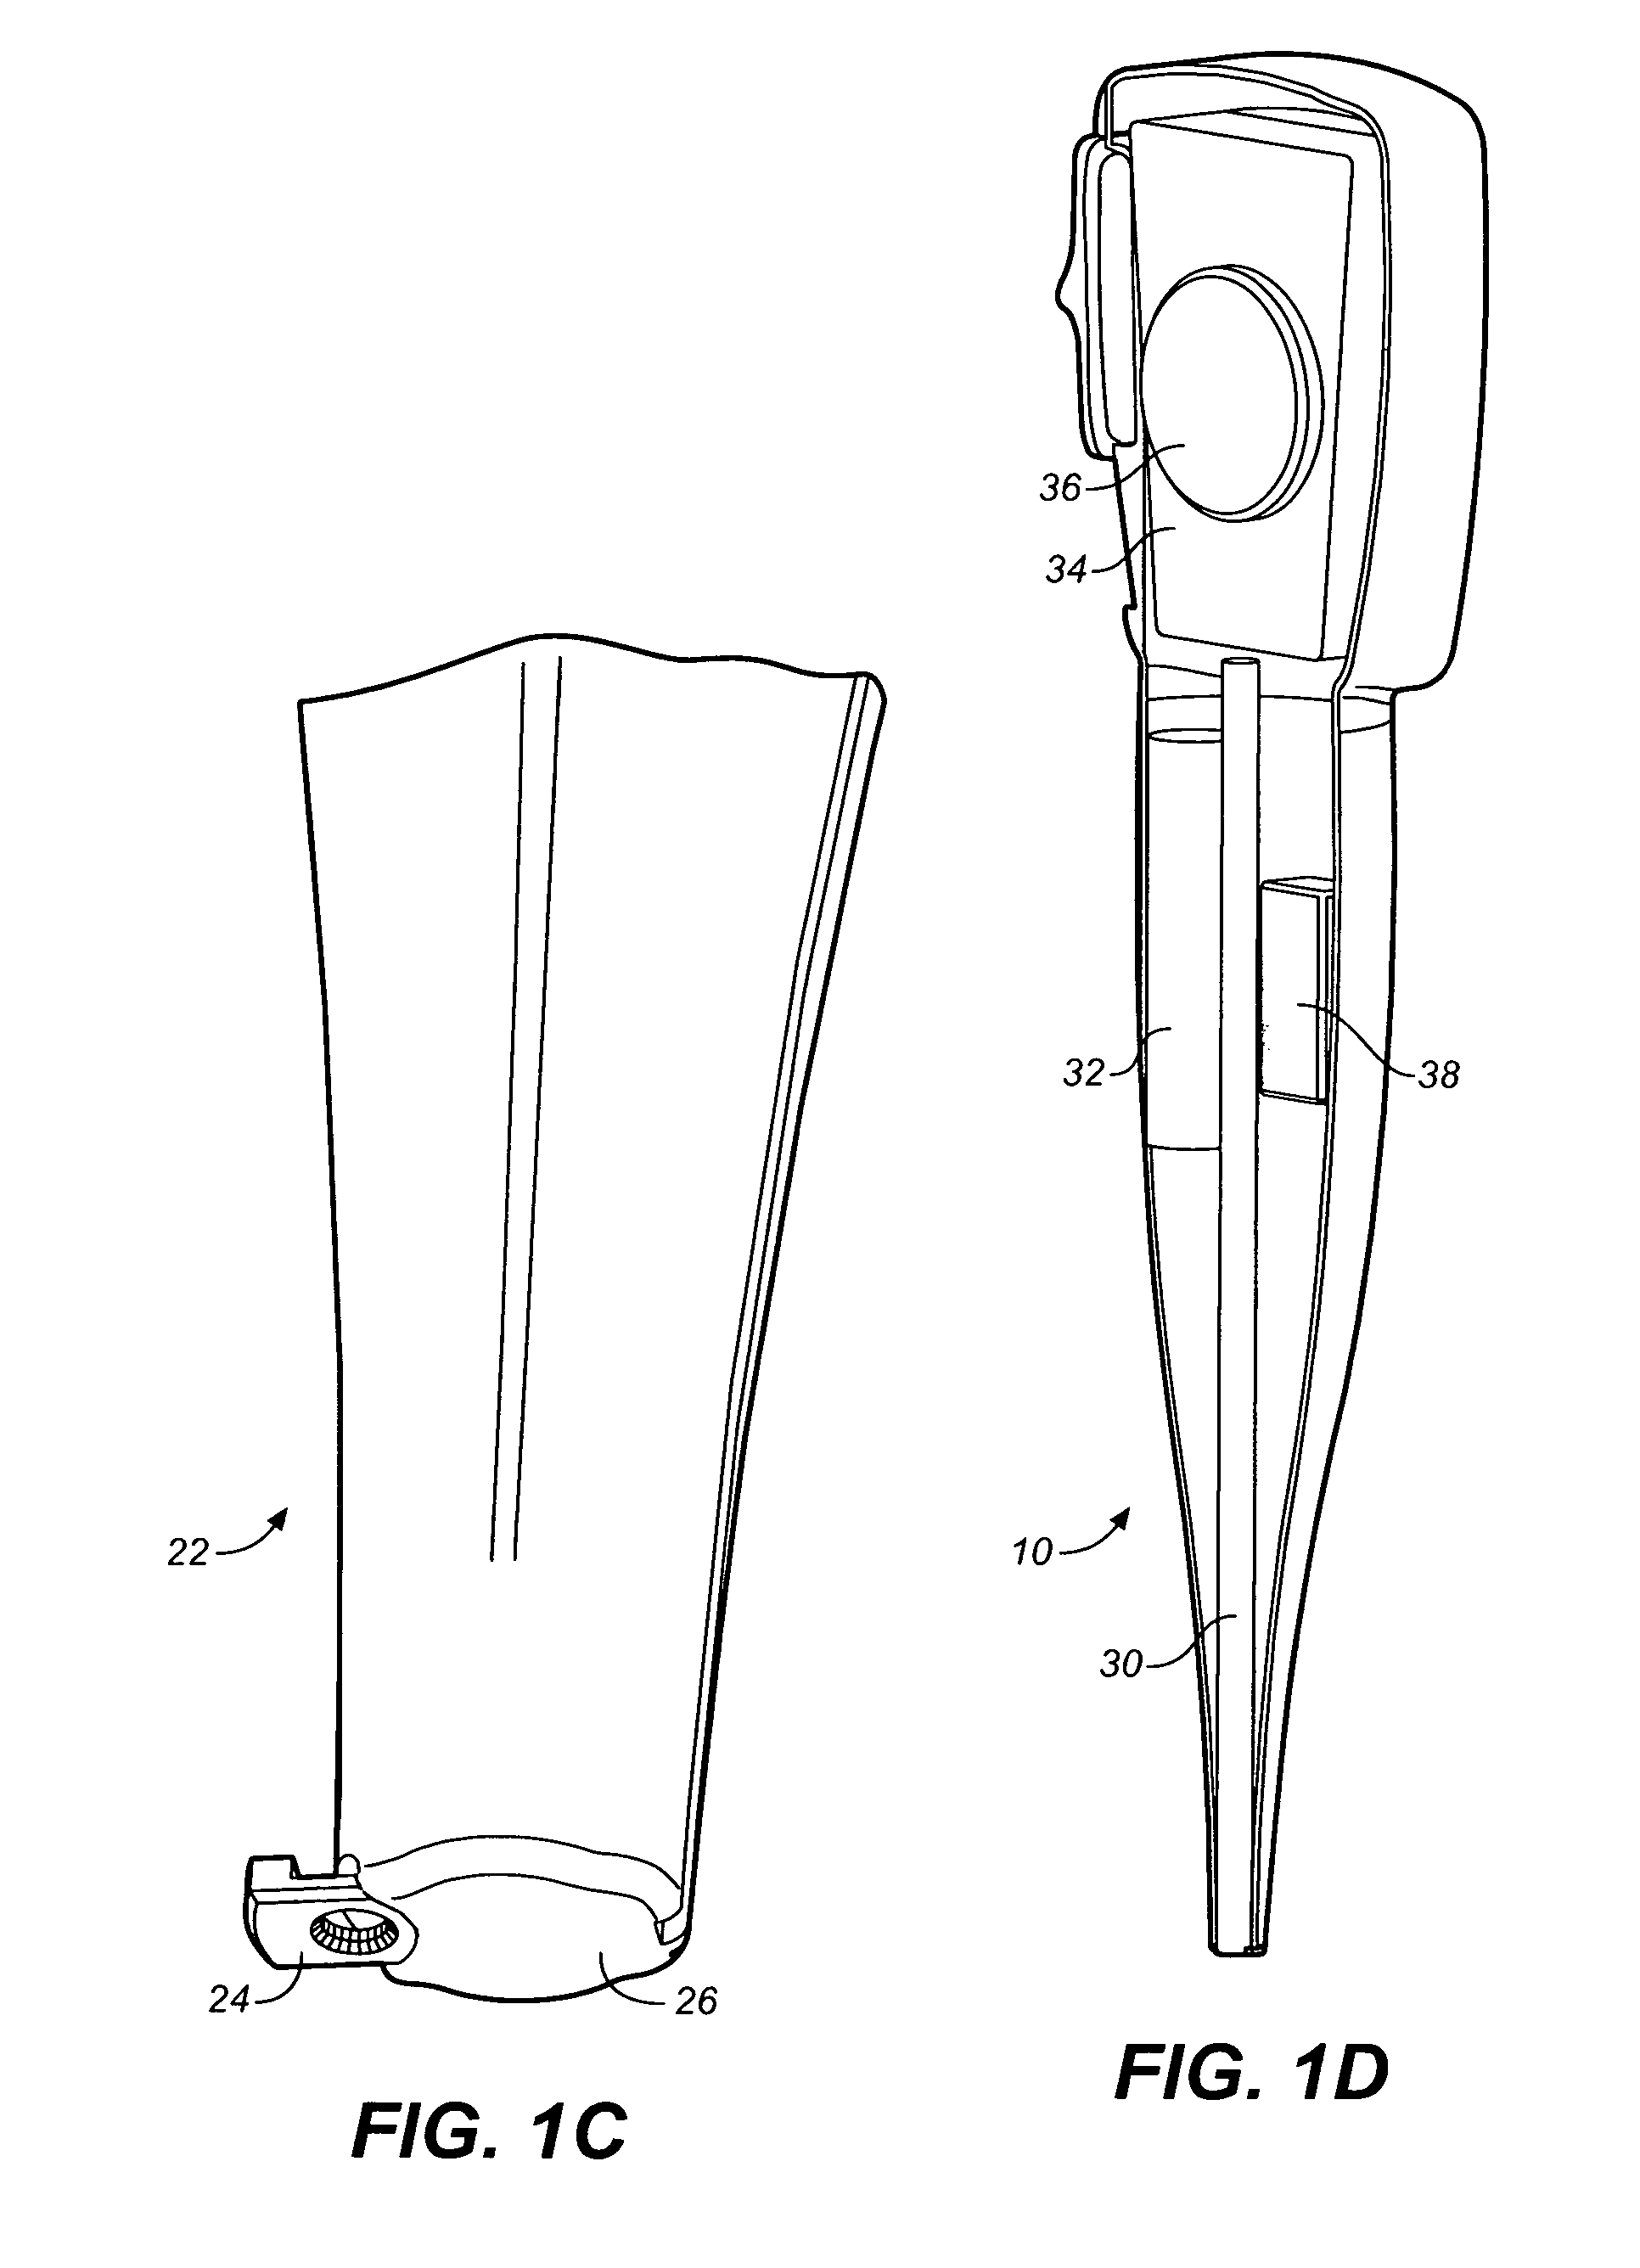 Drug dispensing device with flexible push rod